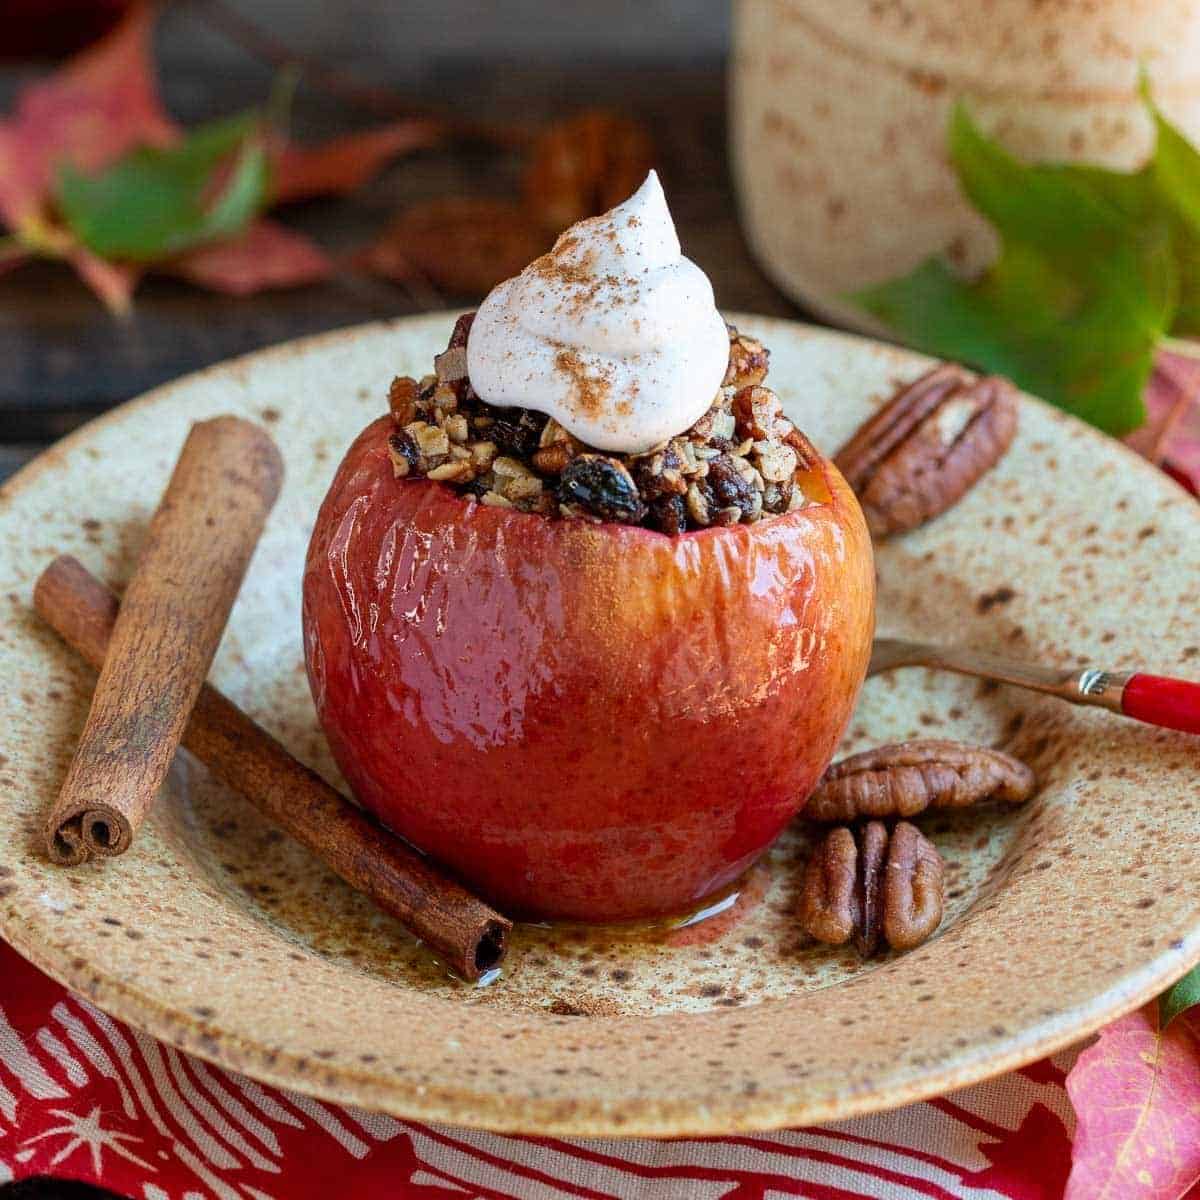 10. Maple Syrup Cottage Cheese Stuffed Baked Apples: 